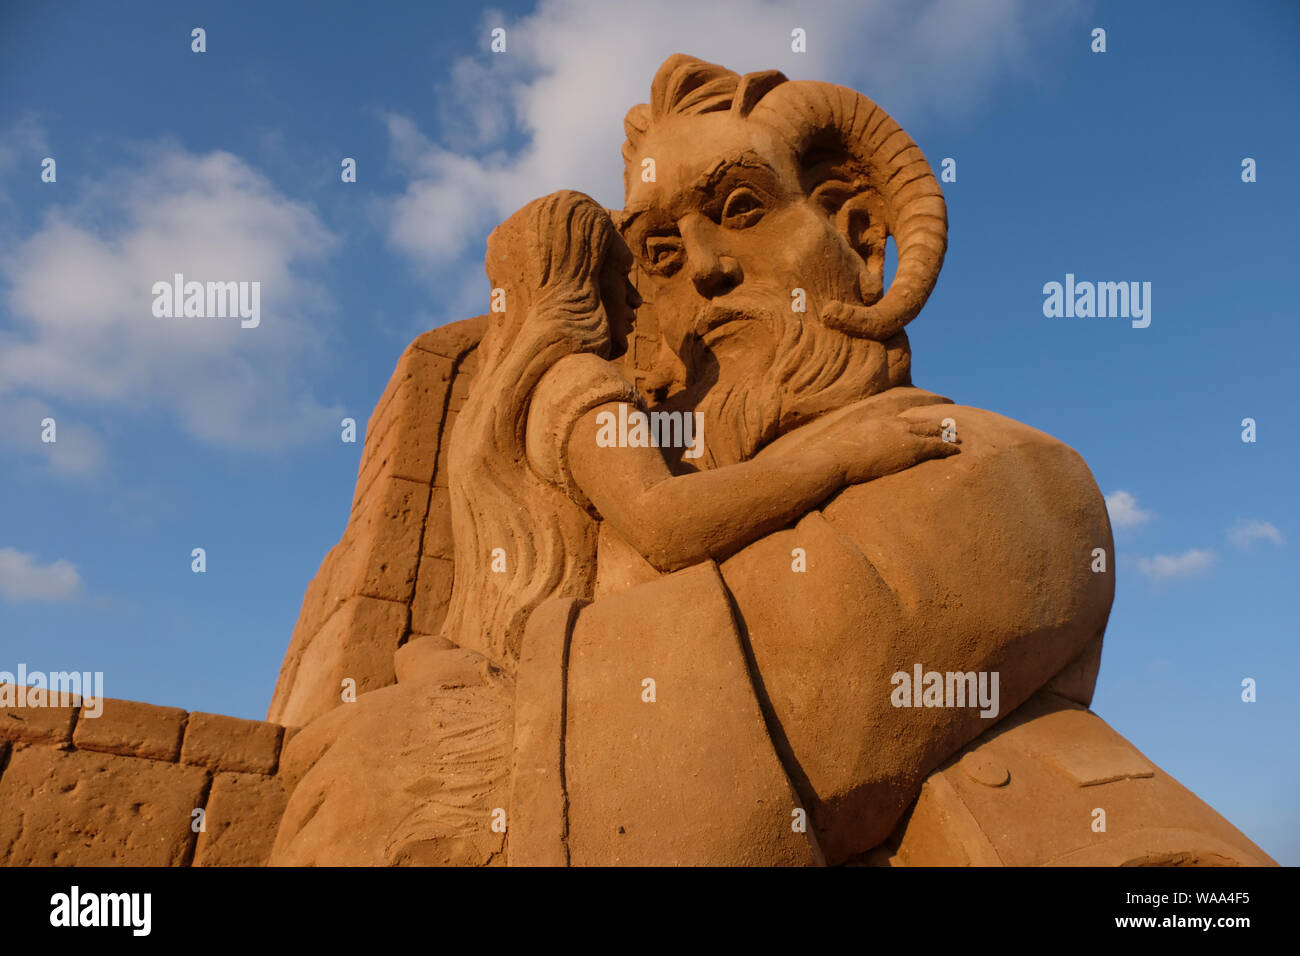 A sand sculpture based on the 'Beauty and the Beast' fairy tale made by Spanish sand sculptors Montserrat Cuesta Marin and Sergio Ramírez Perez on show at the first International Sand Sculpture Festival starring leading artists and all time favorite mythical heroes taking place in Bar Kochba beach in the southern city of Ashkelon in Israel Stock Photo